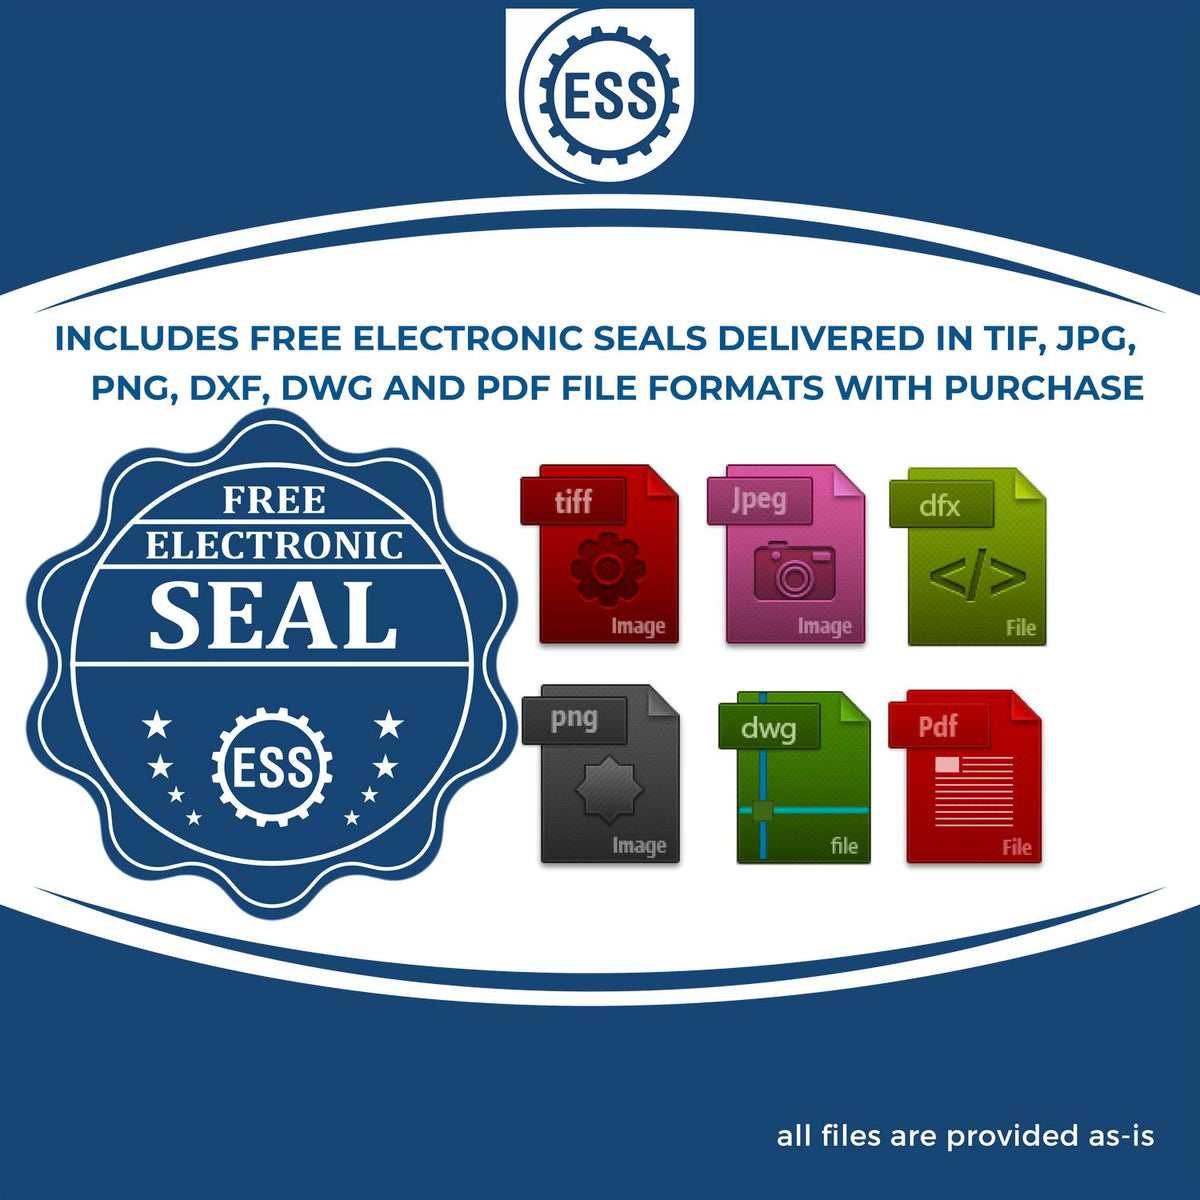 An infographic for the free electronic seal for the Slim Pre-Inked Washington Architect Seal Stamp illustrating the different file type icons such as DXF, DWG, TIF, JPG and PNG.